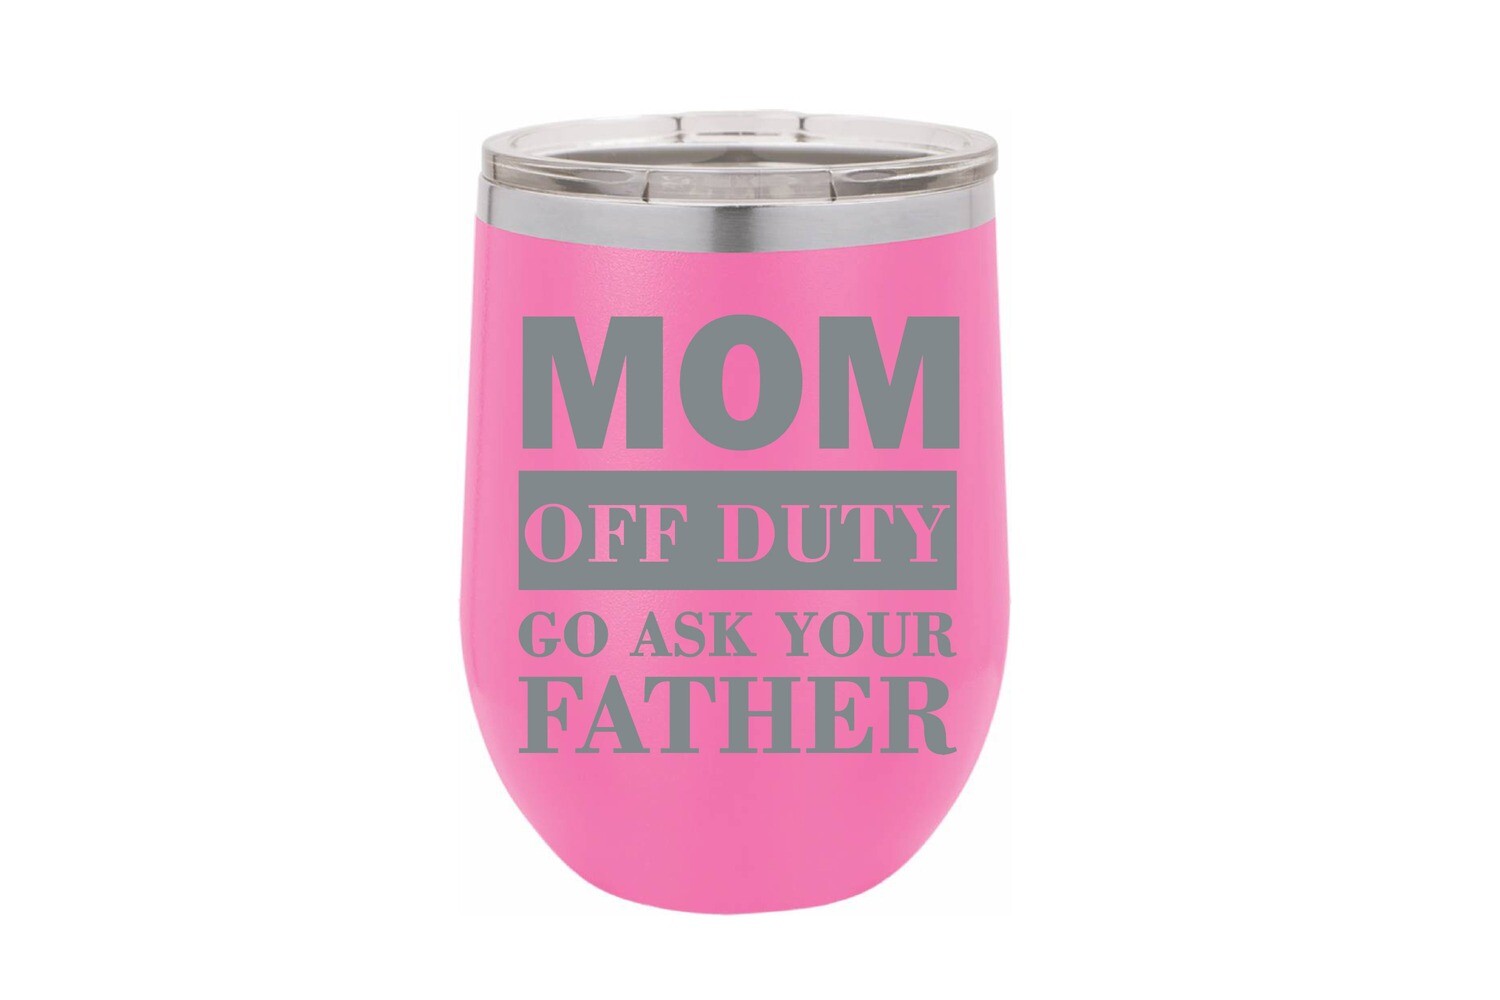 MOM OFF DUTY go ask your father Insulated Tumbler 12 oz